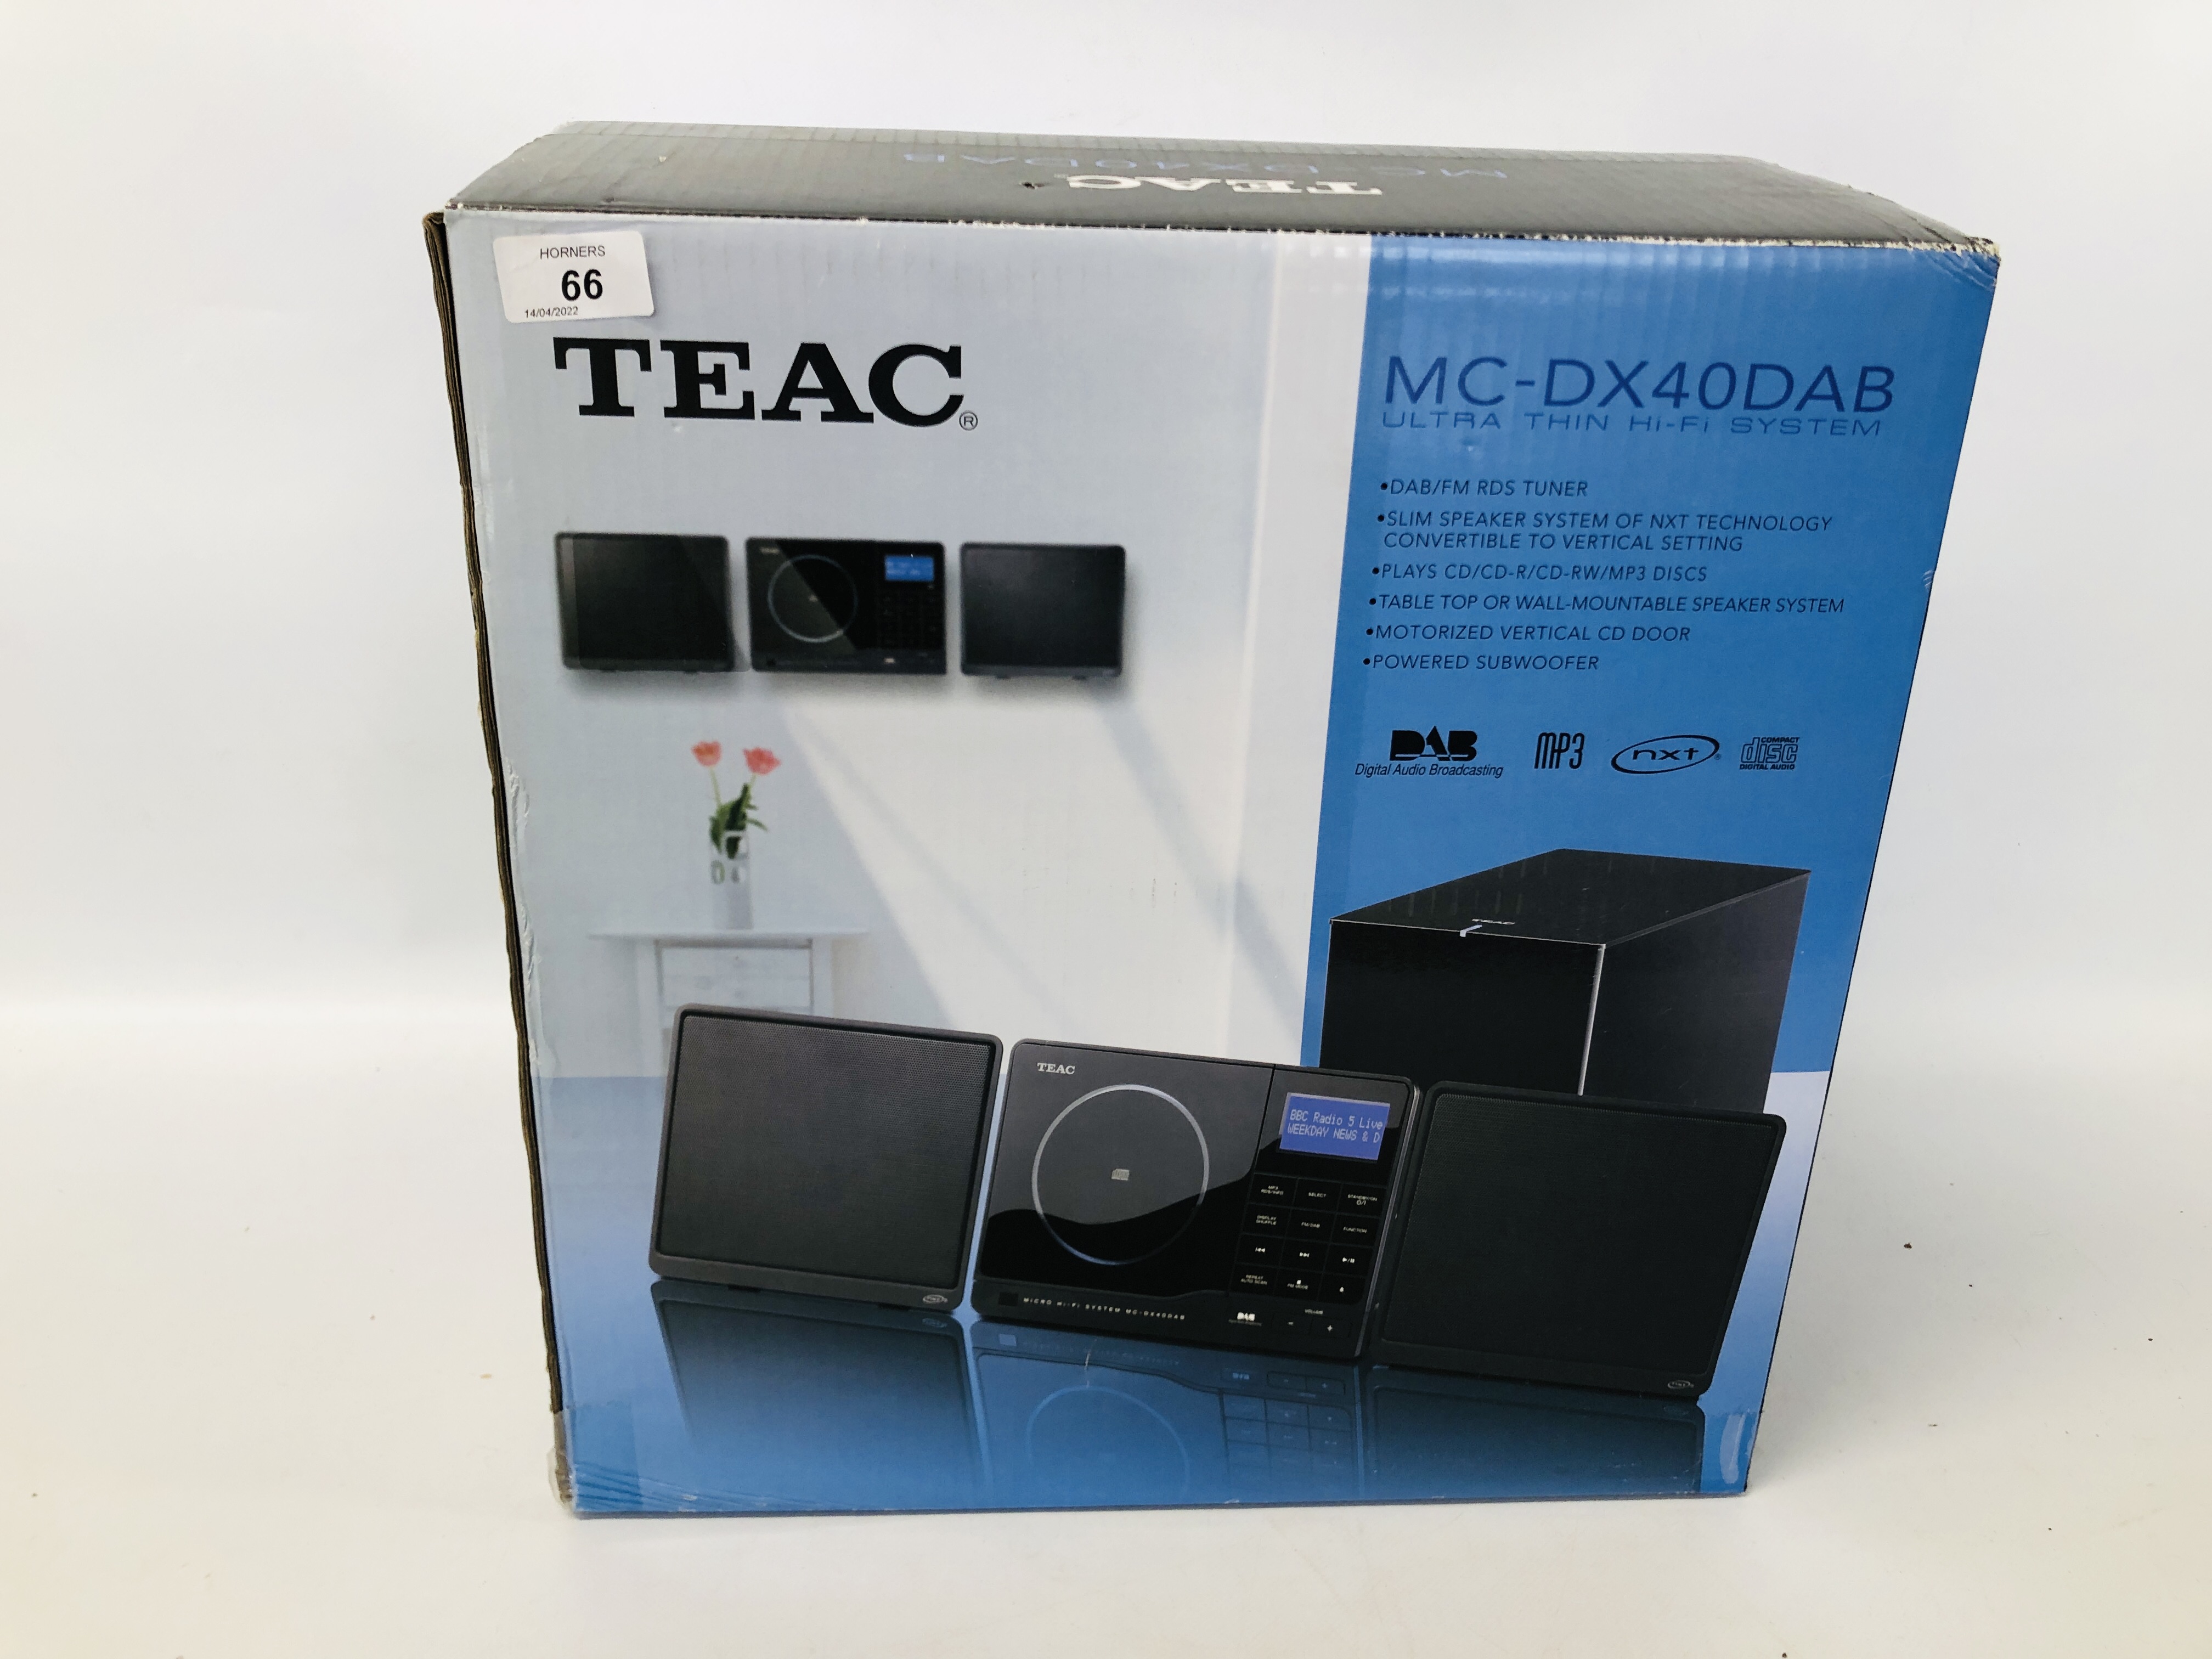 TEAC MC-DX 40 DAB ULTRA THIN HIFI SYSTEM (BOXED AS NEW) - SOLD AS SEEN.